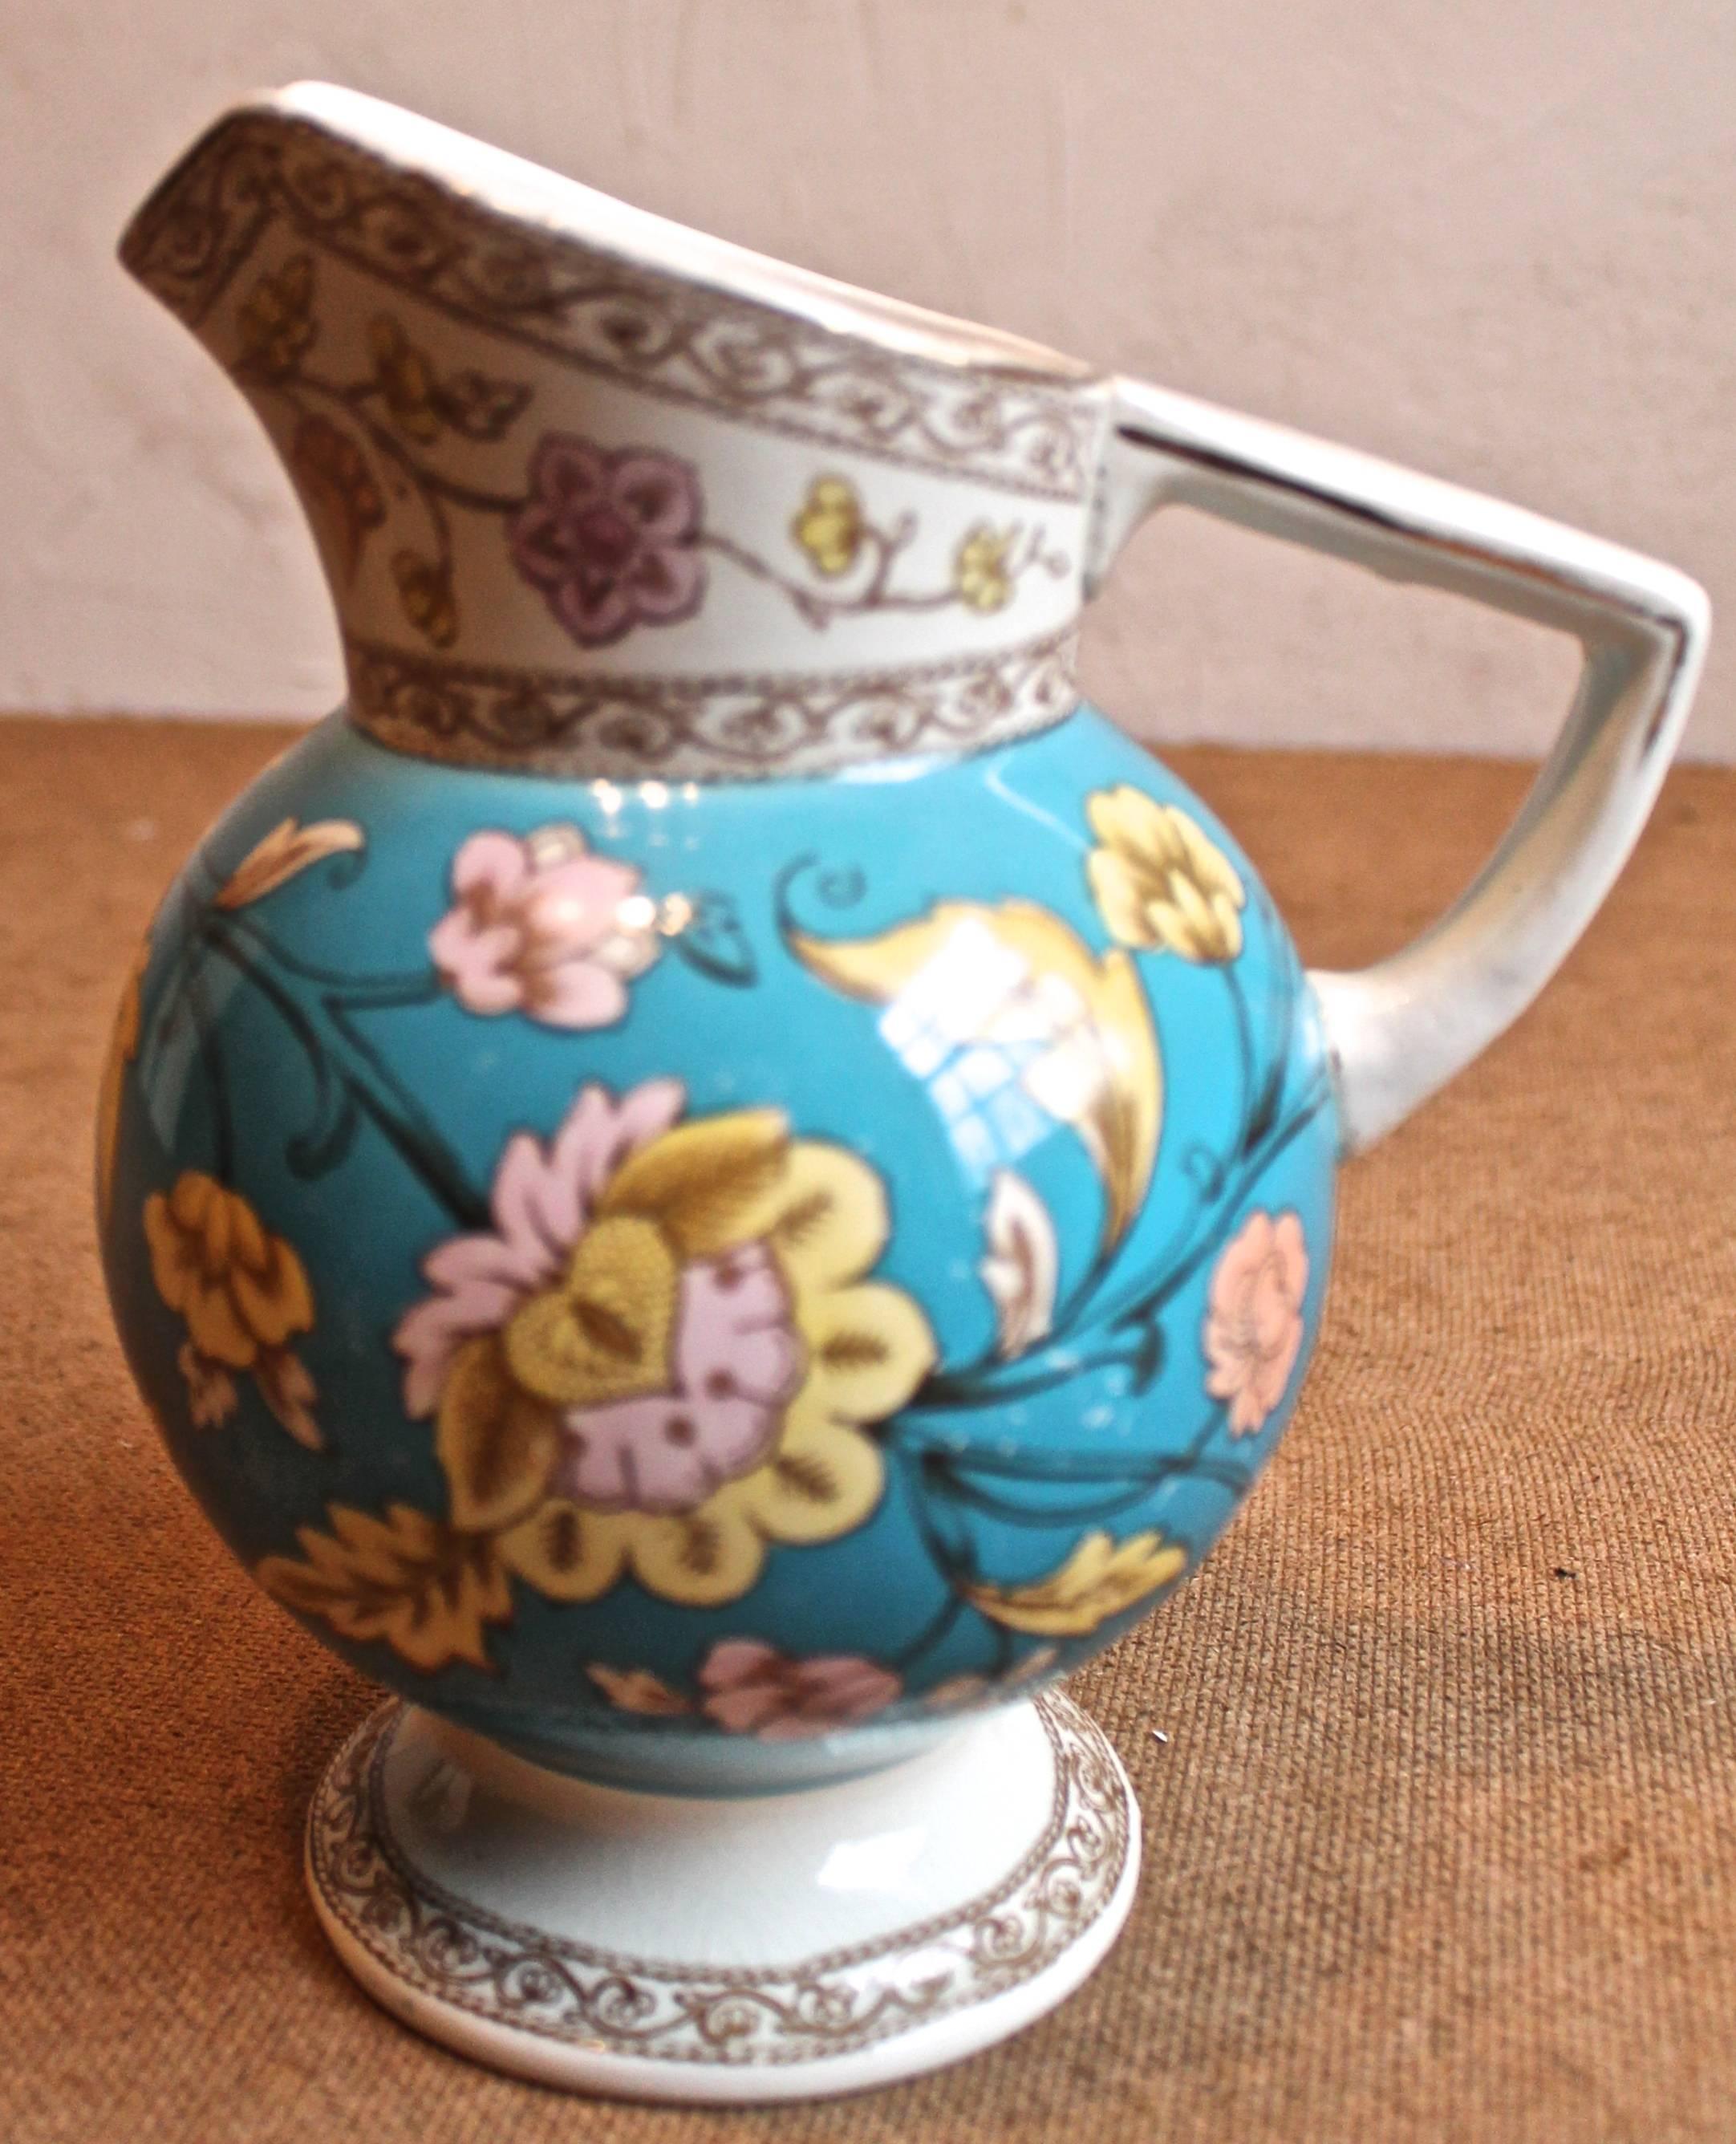 Beautiful example of an English Aesthetic Movement ceramic for Old Hall Earthenware Company Limited, c.1881.  A similar 'Indiana' pitcher Illustrated and discussed in 